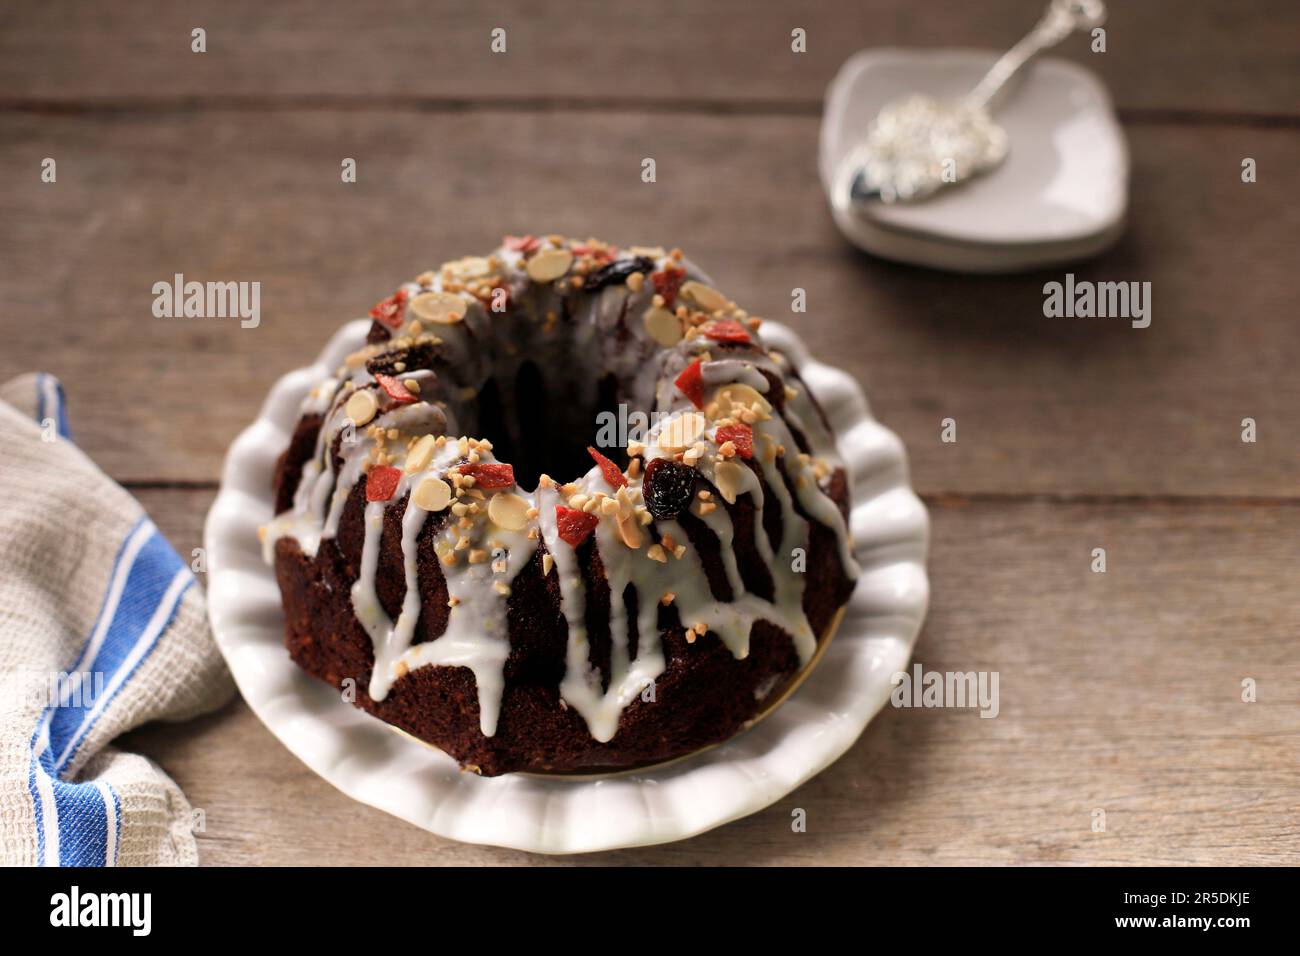 Chocolate Christmas Bundt Fruit Cake with Lemon Frosting, Fruity and Chopped Almonds Toping Stock Photo